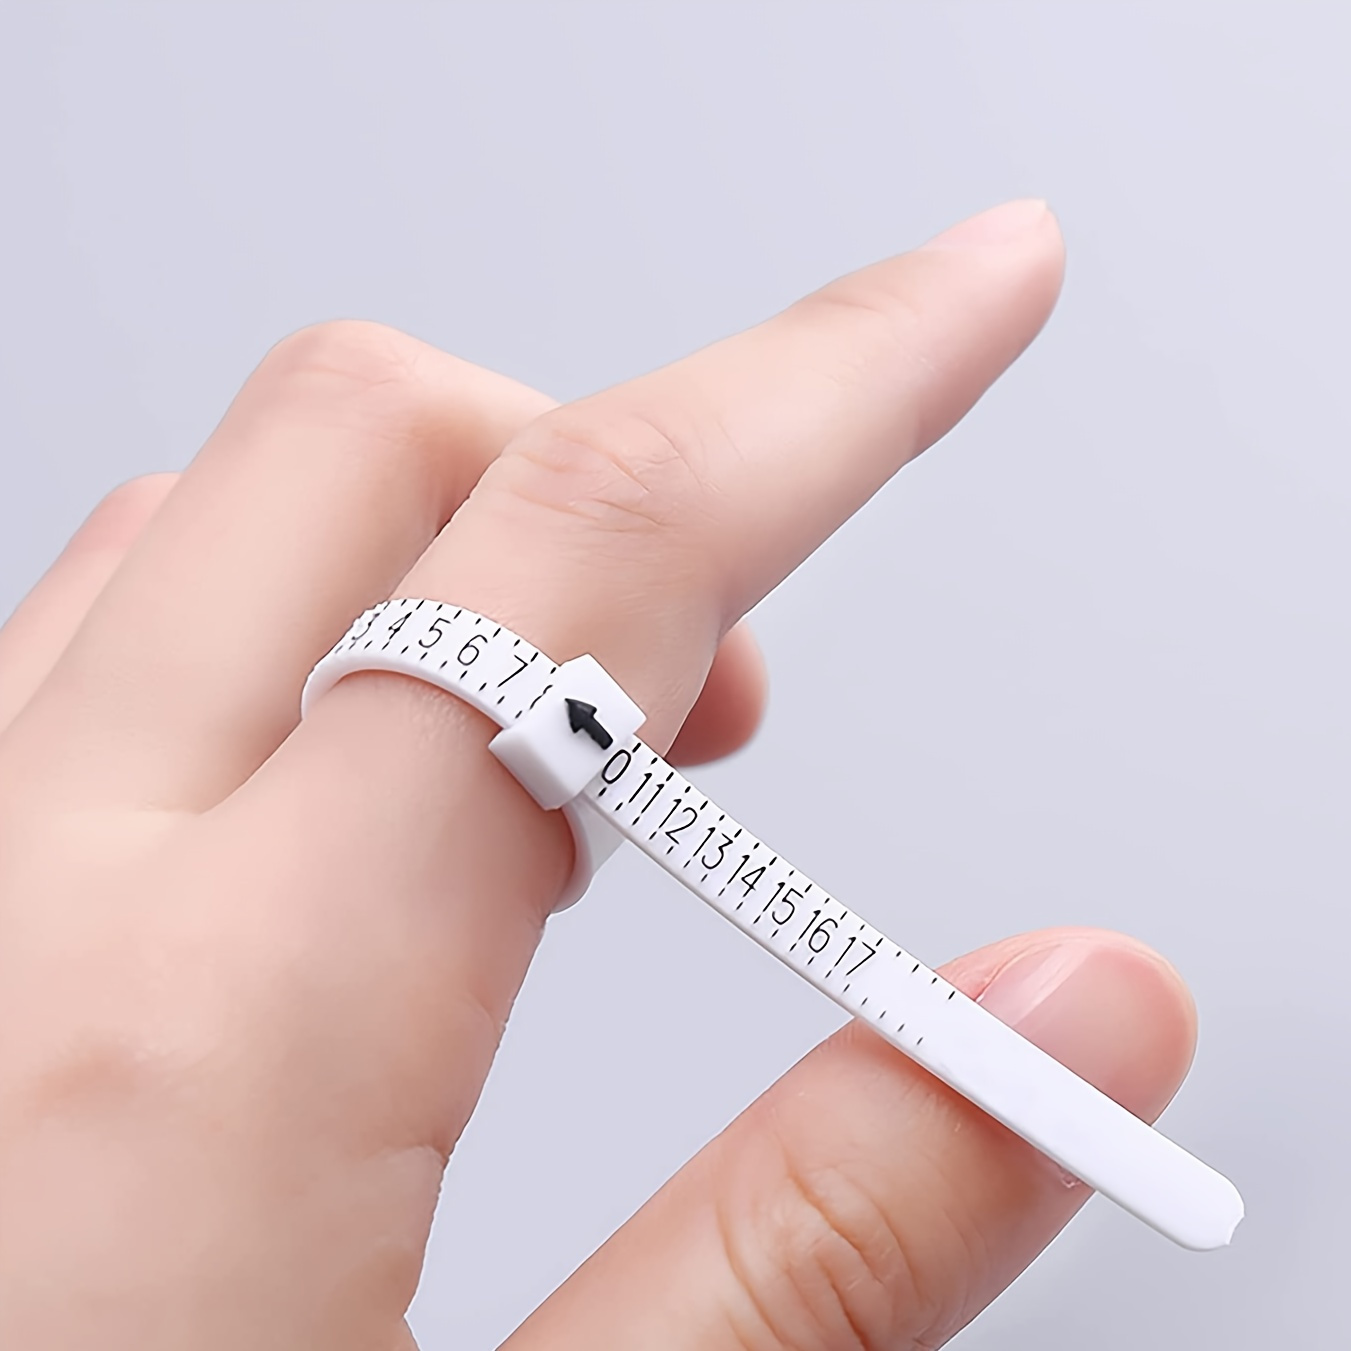 Retail Jewelry Ring Sizer Tool US Size Plastic Ring Measuring Template  Convenient Ring Finger Sizer Gauges 2 13 From Jltrading, $3.53